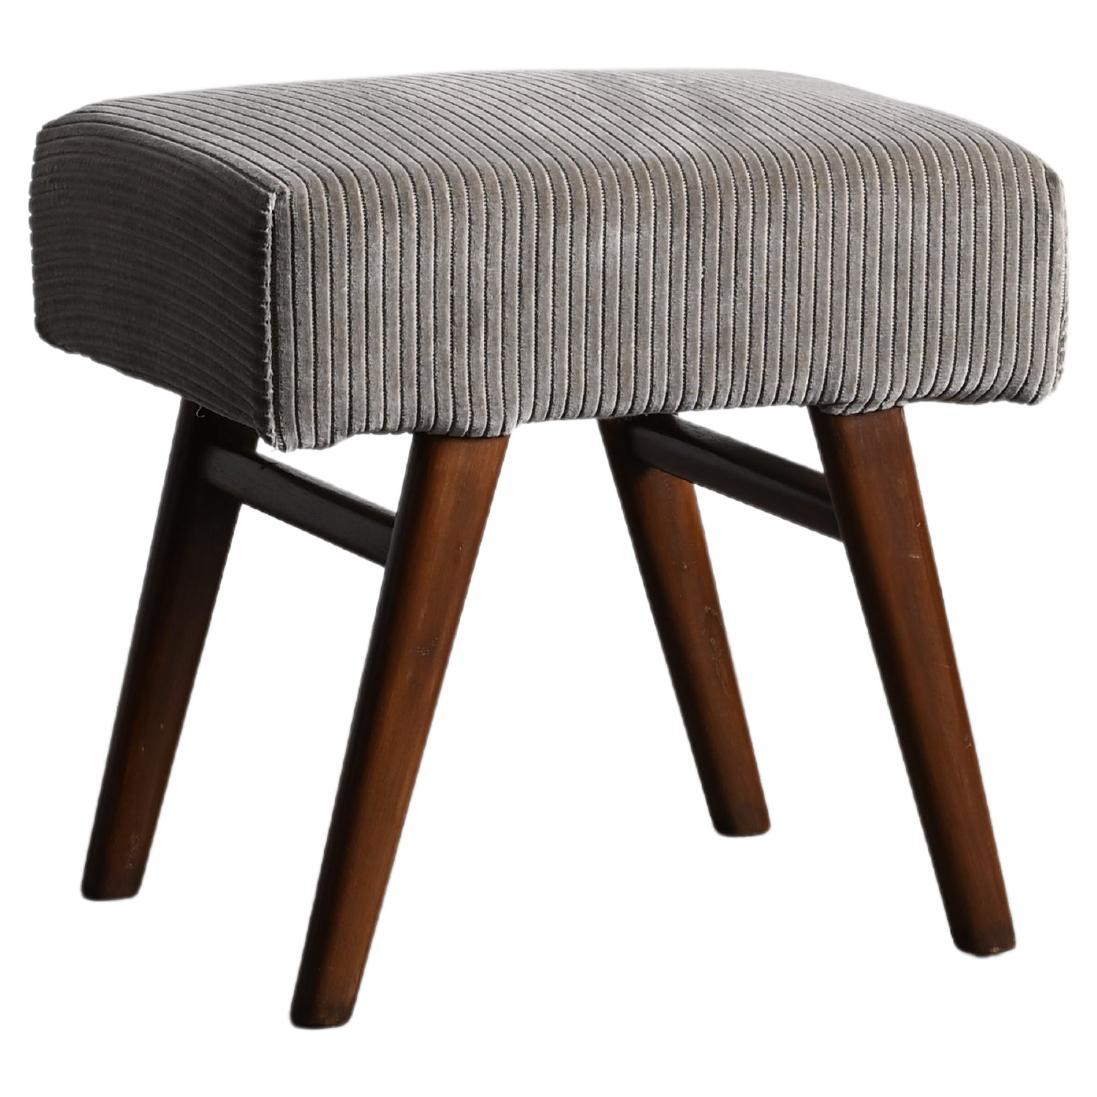 Pierre Jeanneret PJ-SI-40-B Low Upholstered Stool / Authentic Mid-Century Modern For Sale